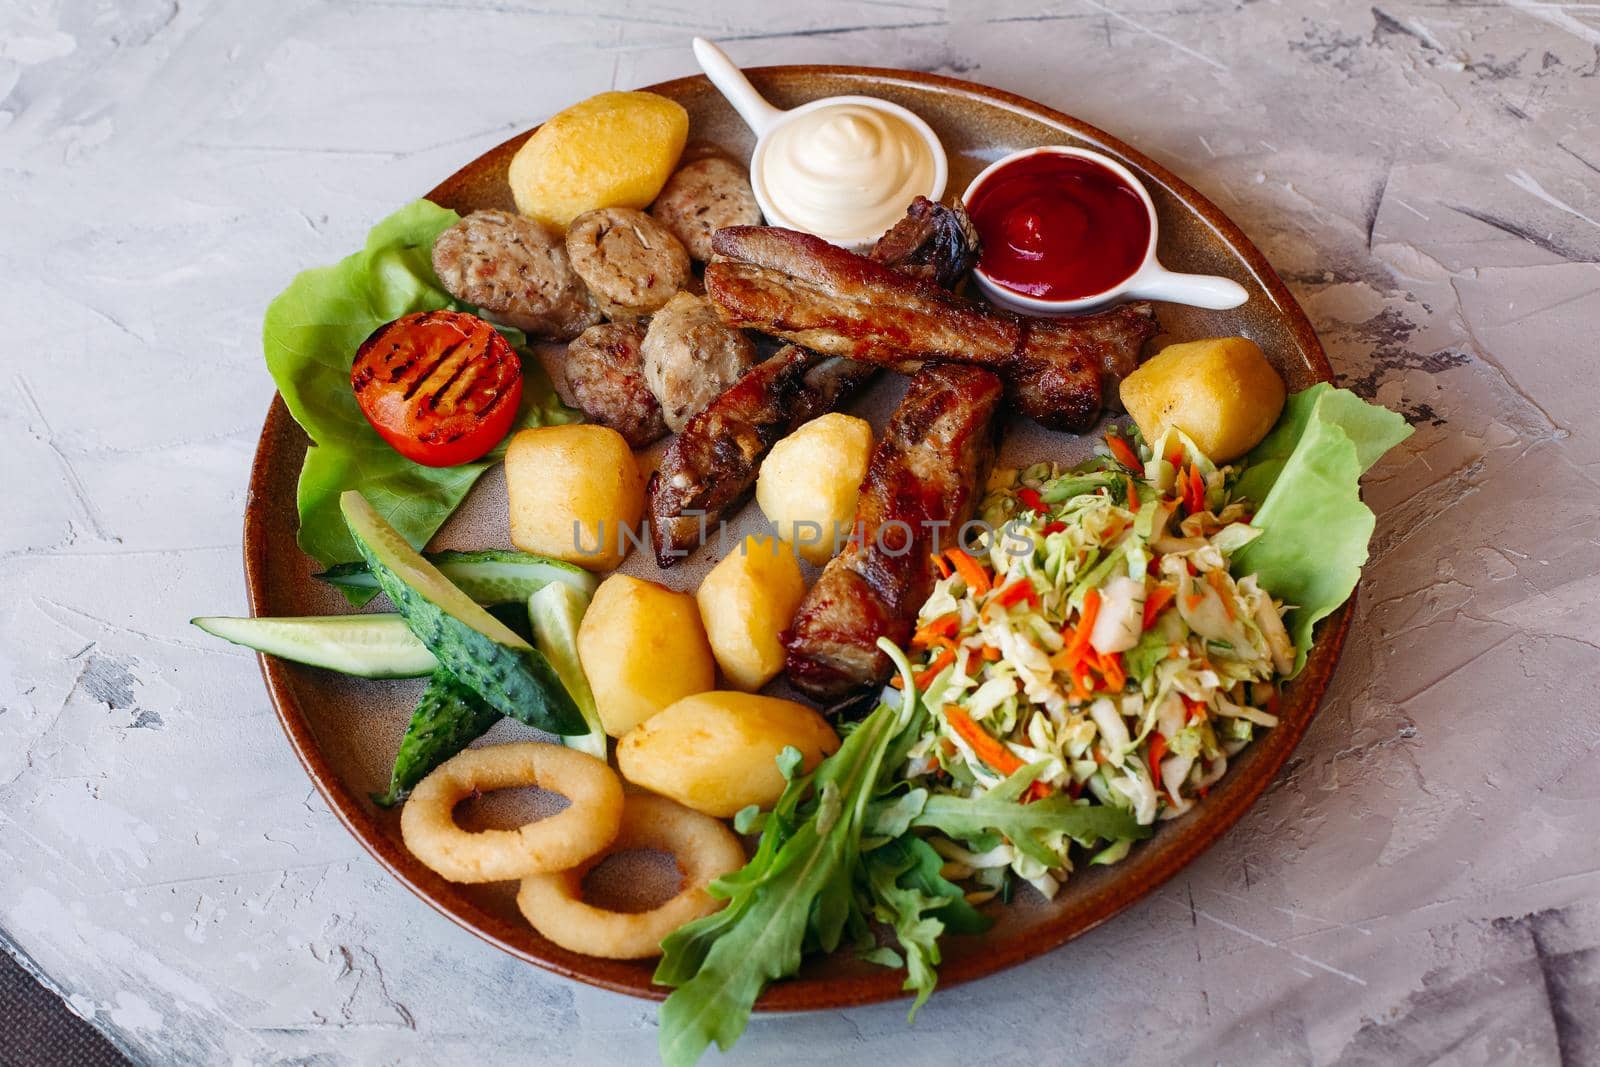 Delicious restaurant appetizers set for beer. vegetable salad, boiled potatoes, grilled chicken legs, roasted onion, sausages, cucmbers, tomatoes and sauces - ketchup and mayo laying on clay plate.